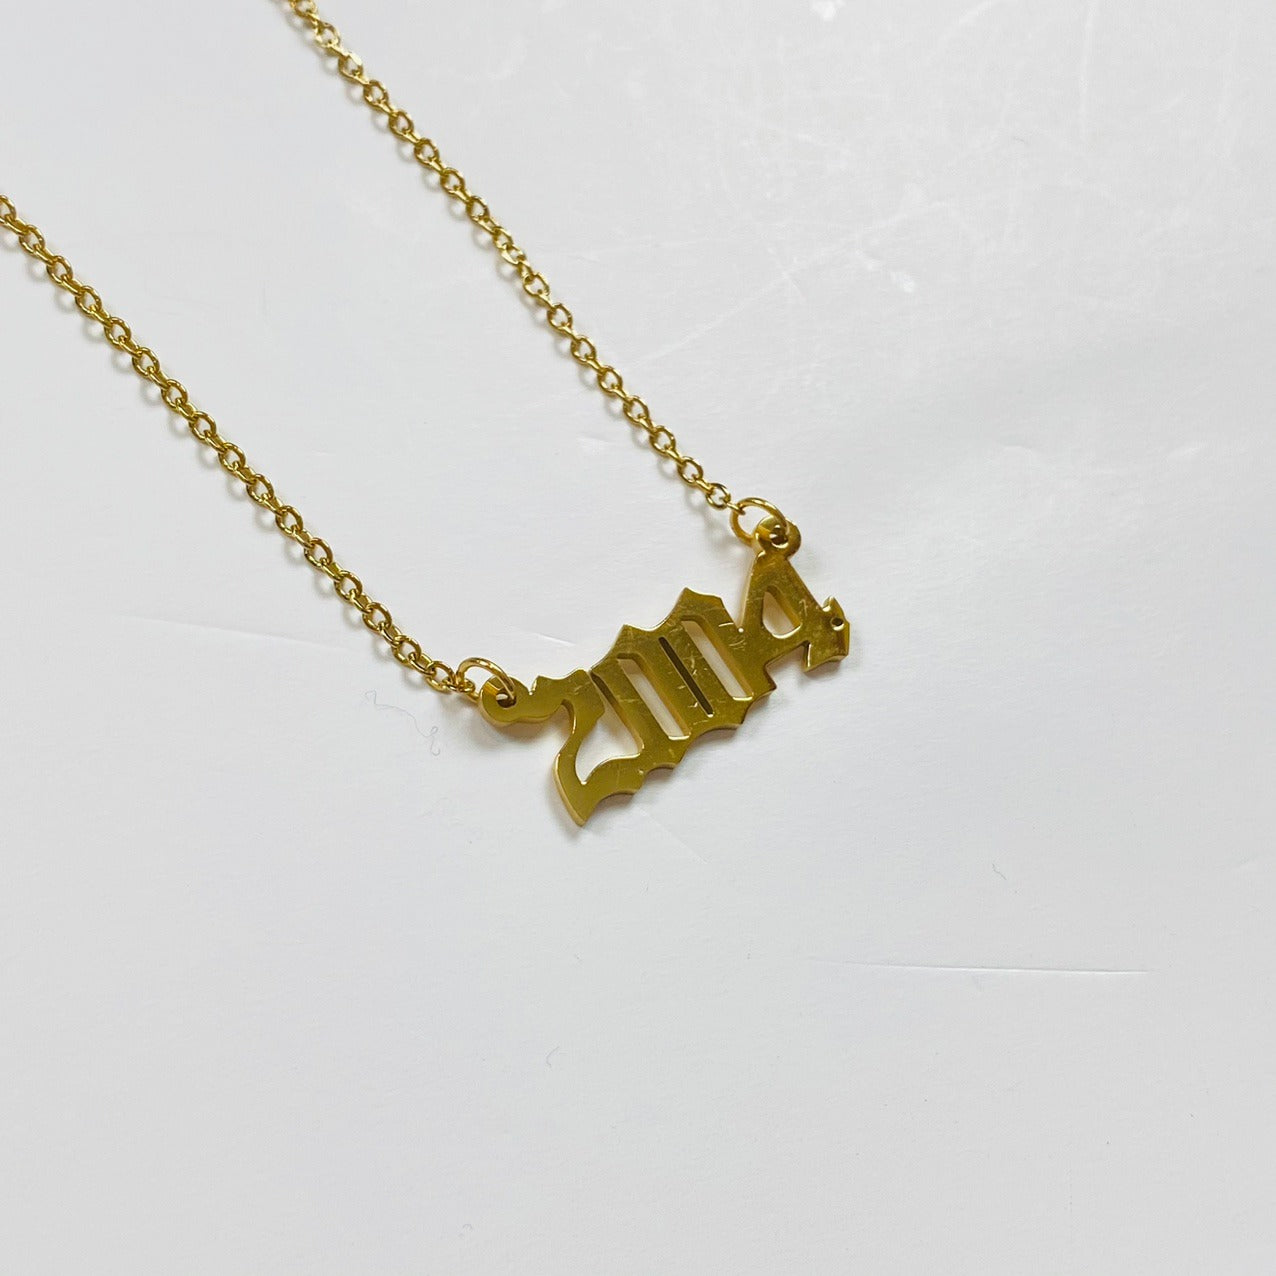 2004 Birth Year Necklace Chain Gold